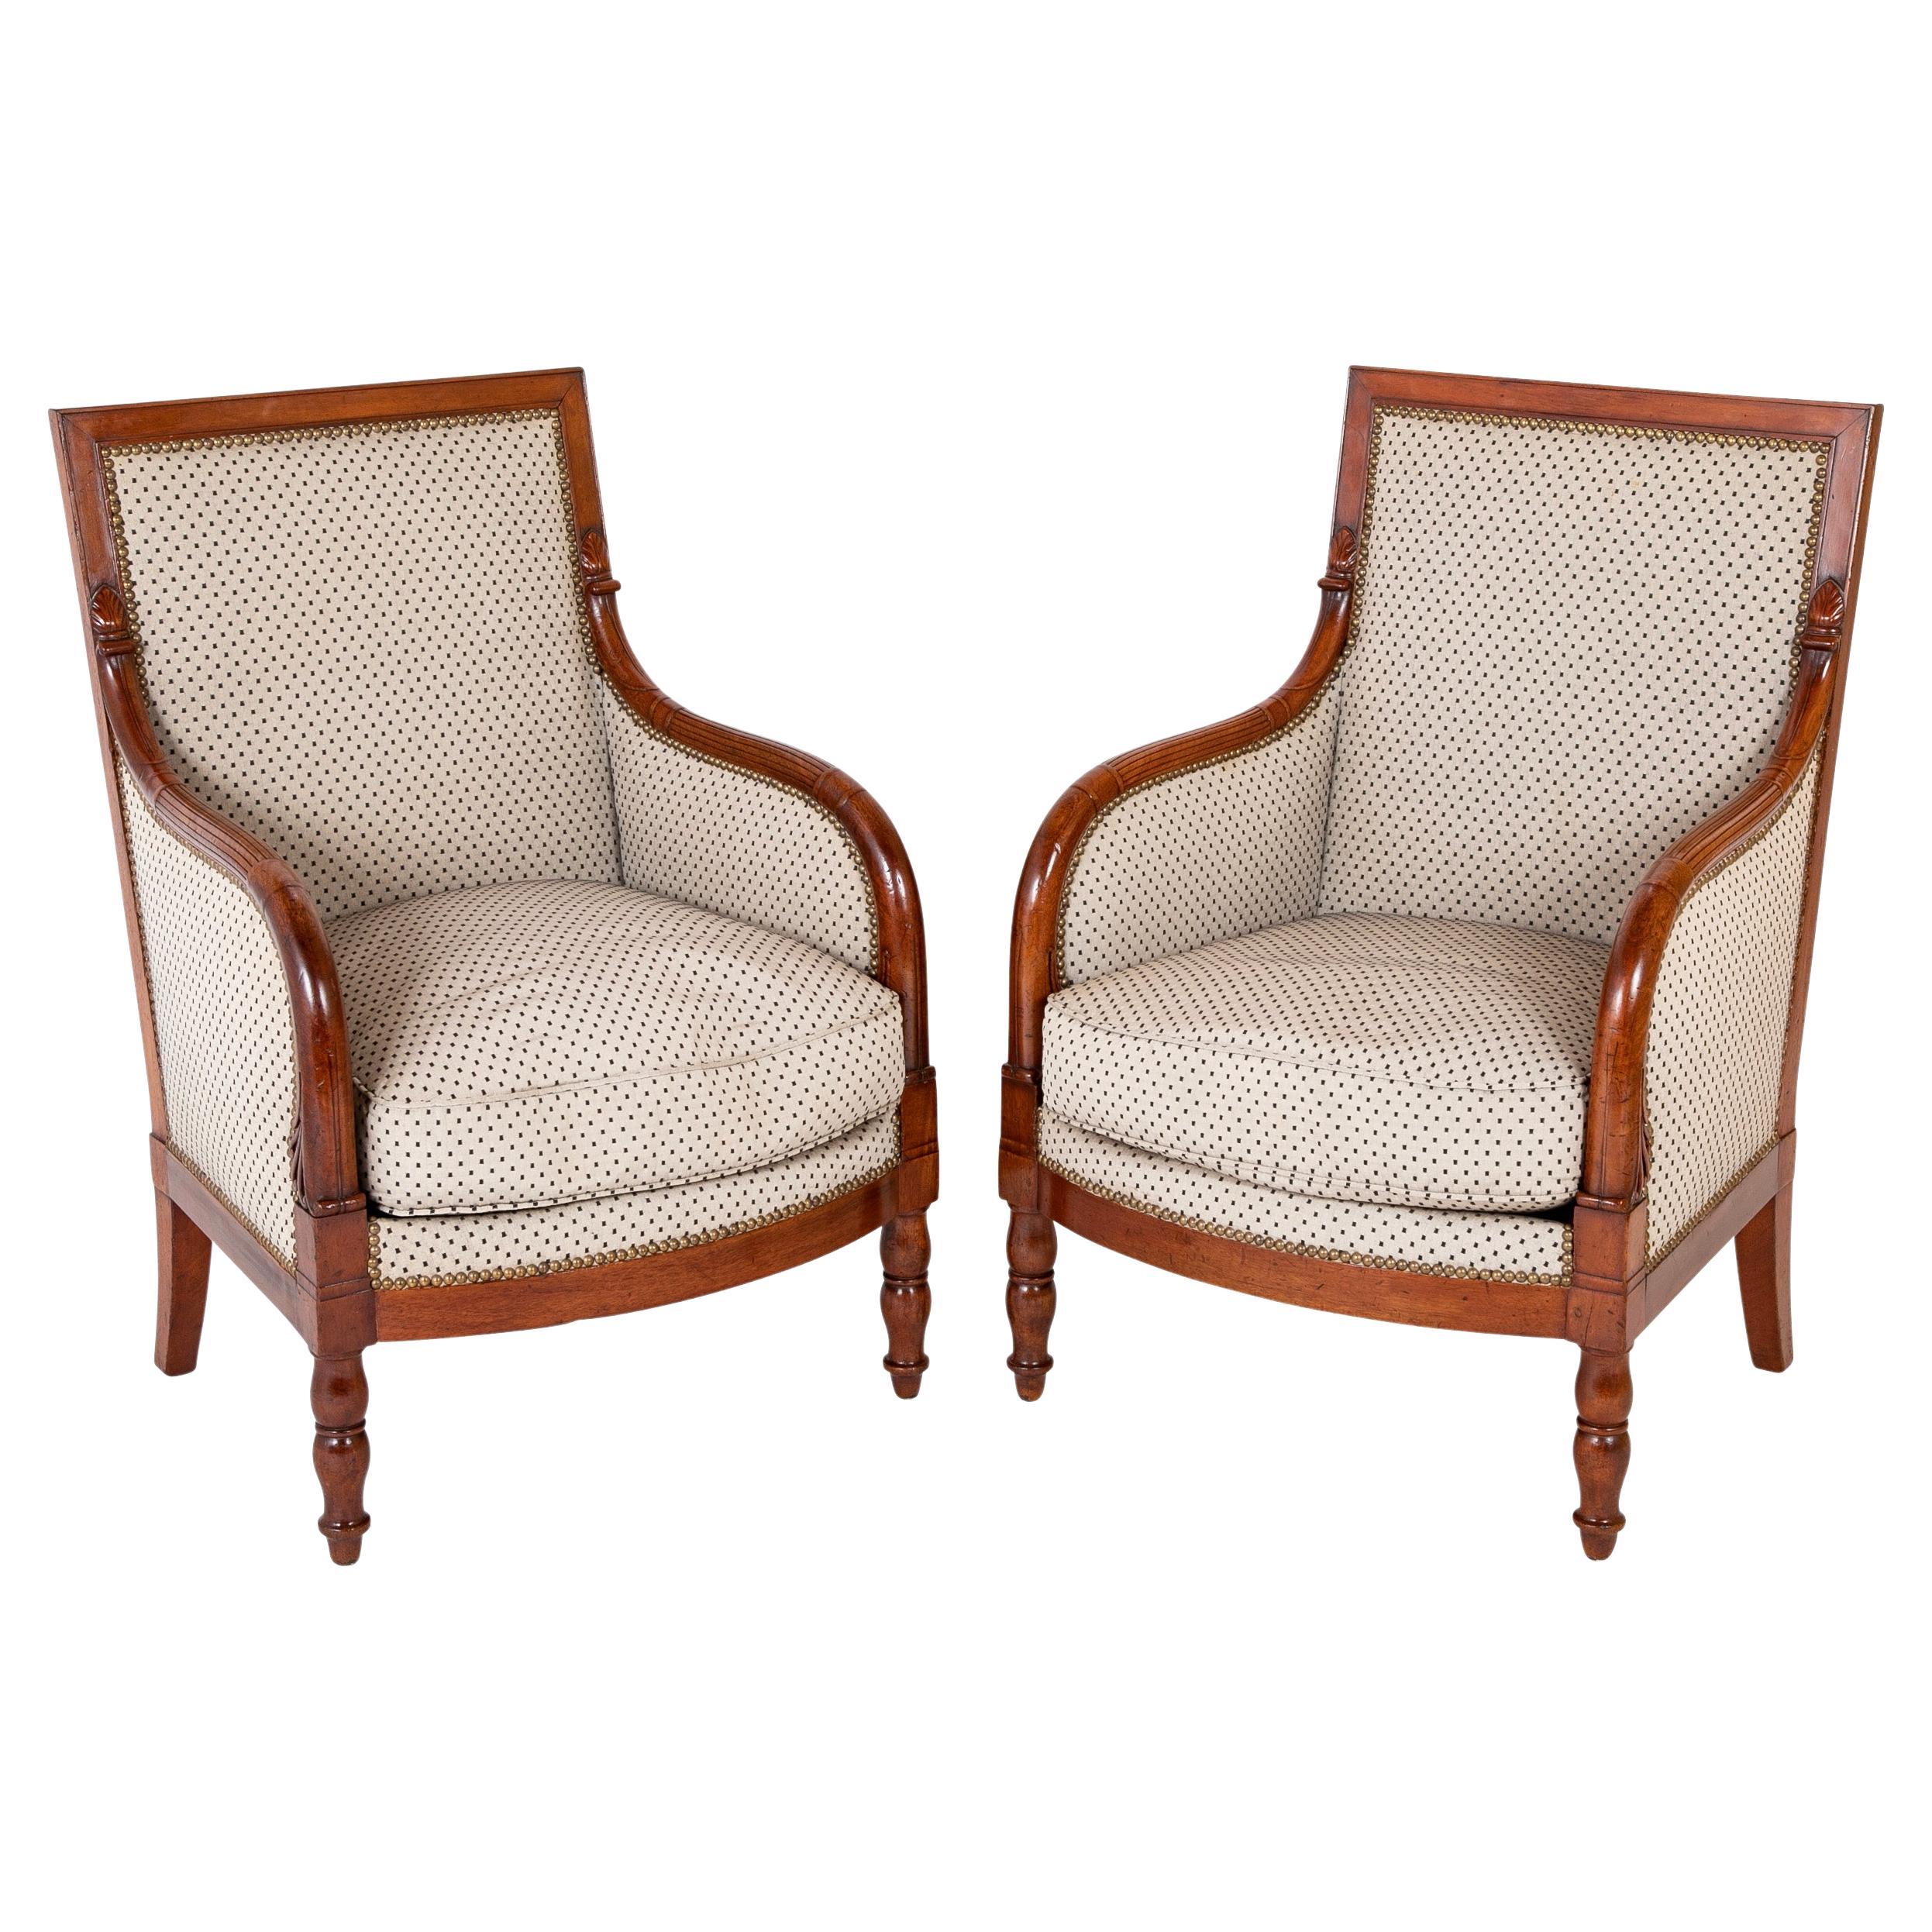 Pair of Empire Mahogany Armchairs Stamped "Jacob D R Medee" For Sale